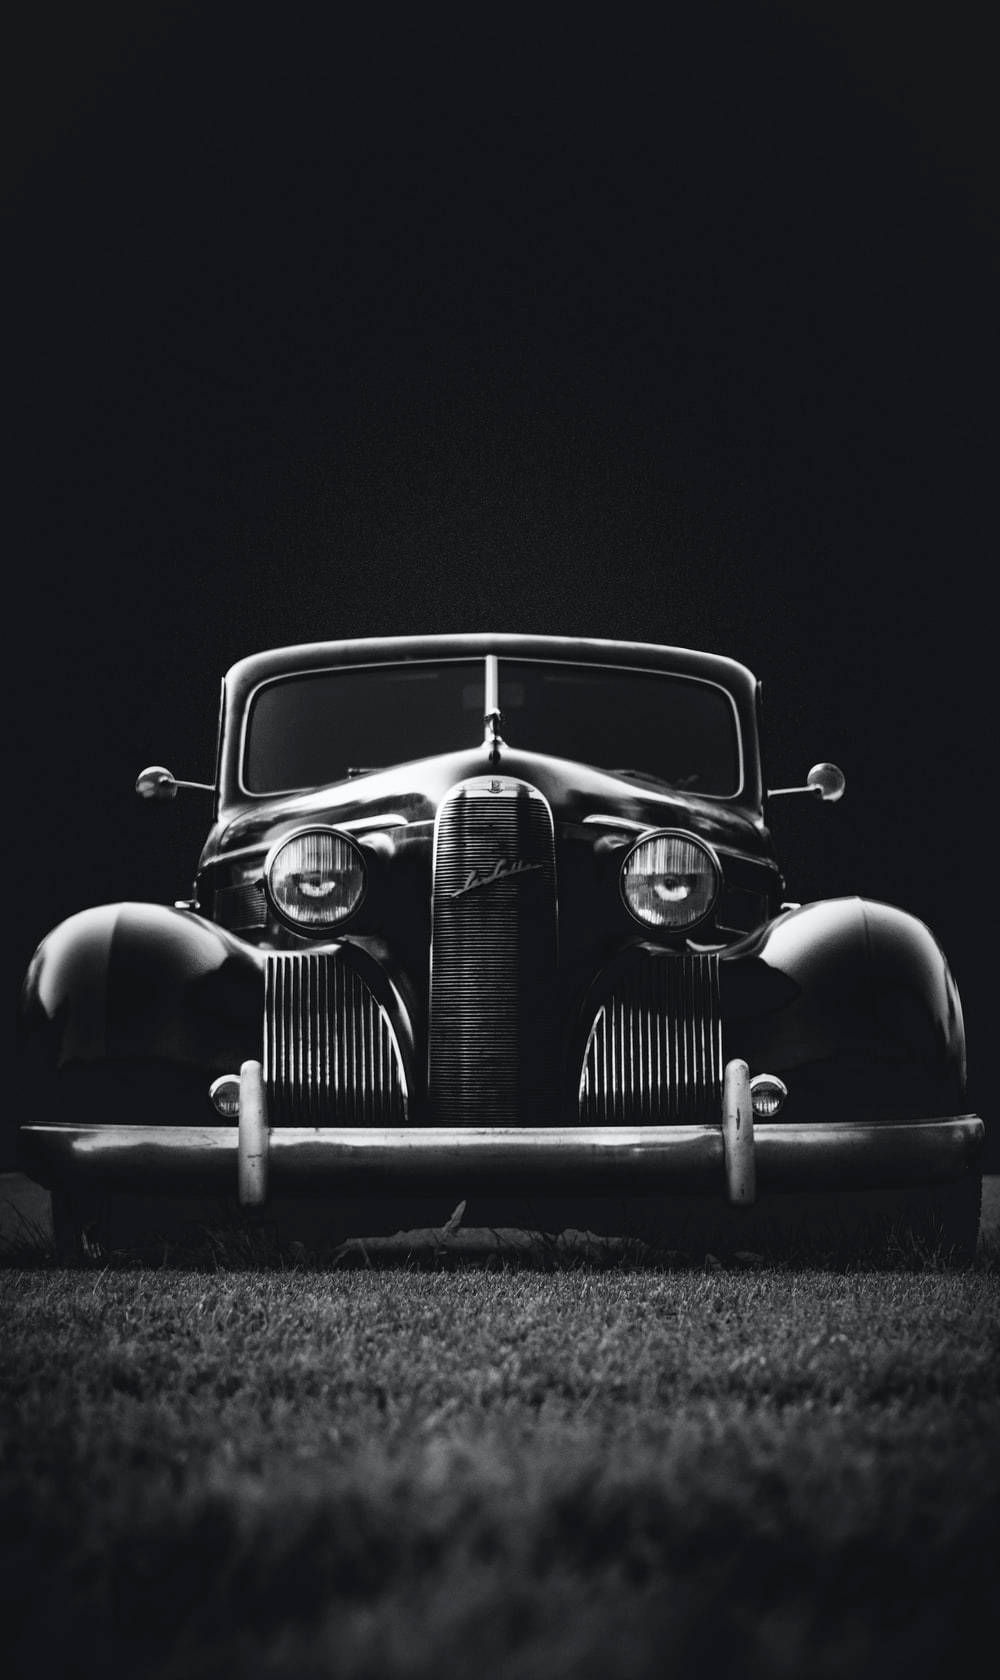 Hd Vintage Car In Black And White Background